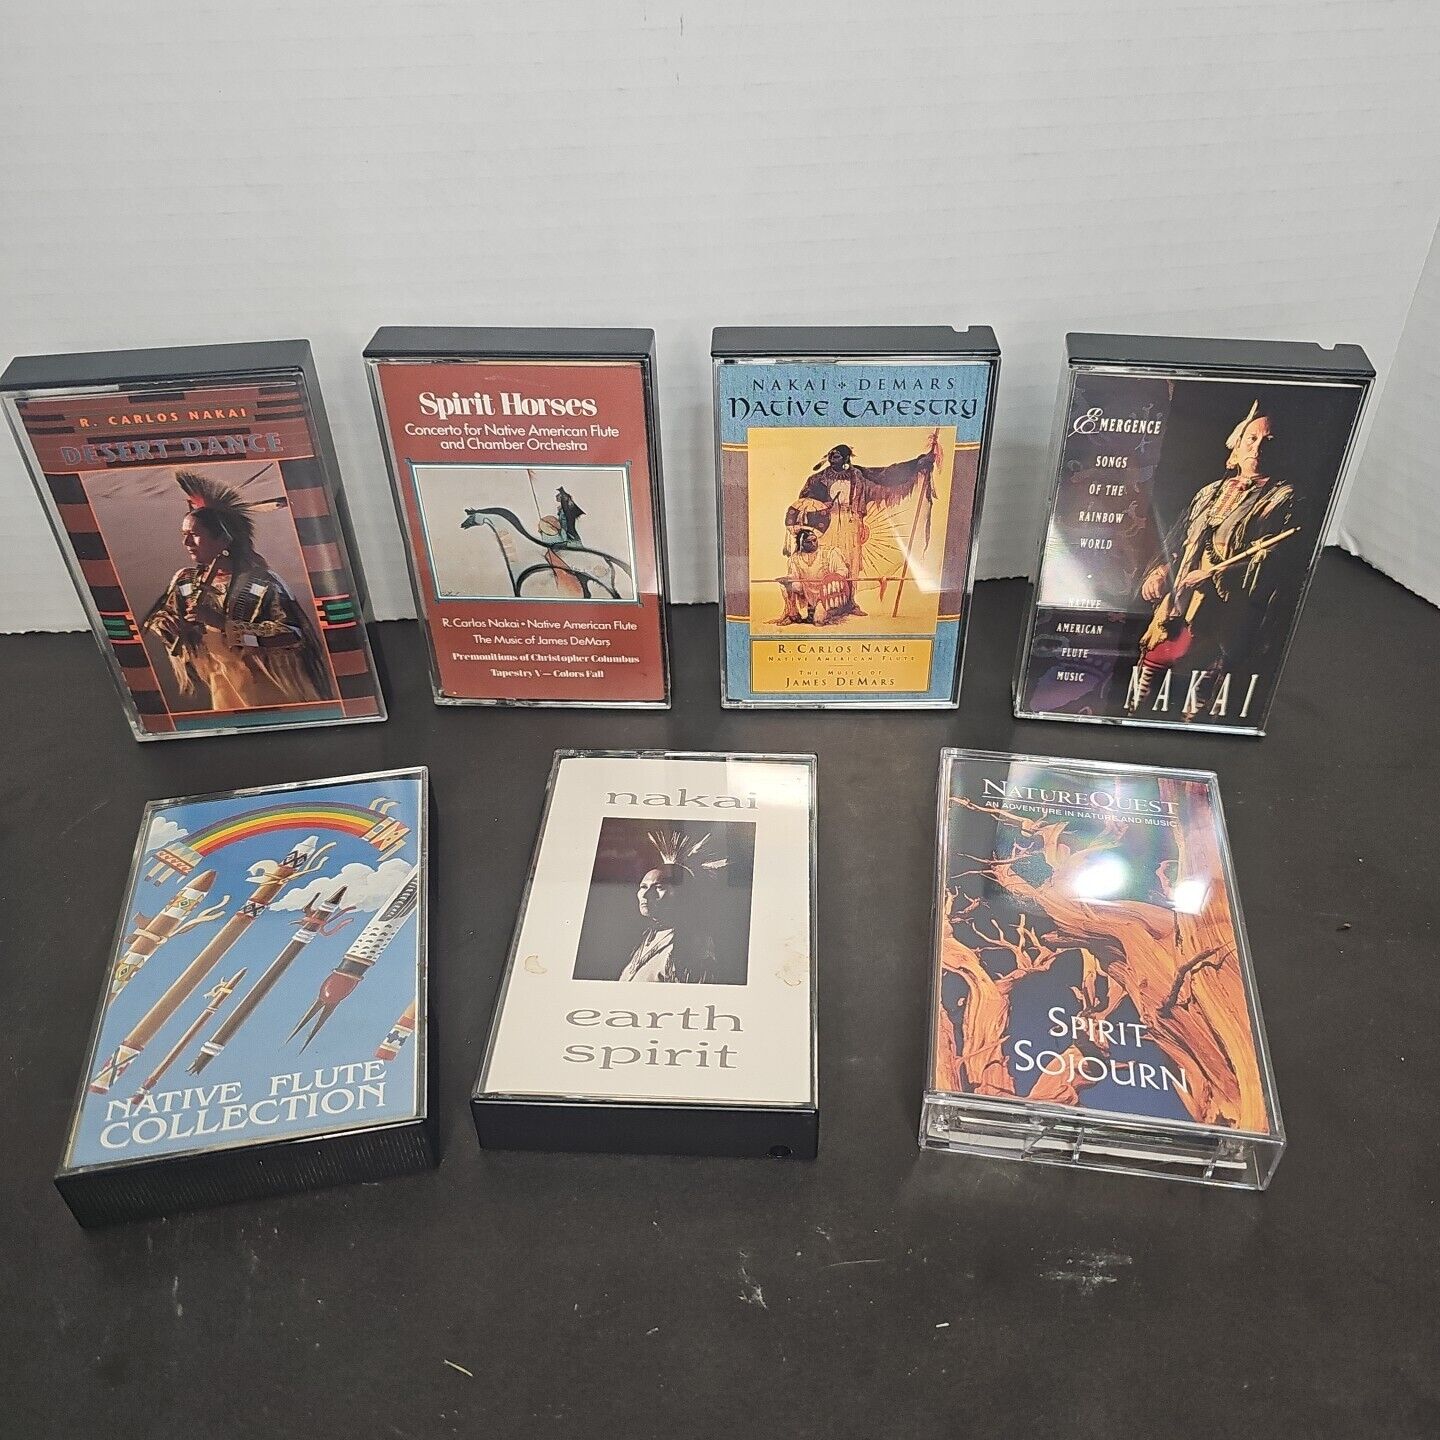 Lot 7 Vintage Native American Indian Music Cassette R Carlos Nakai & Others 